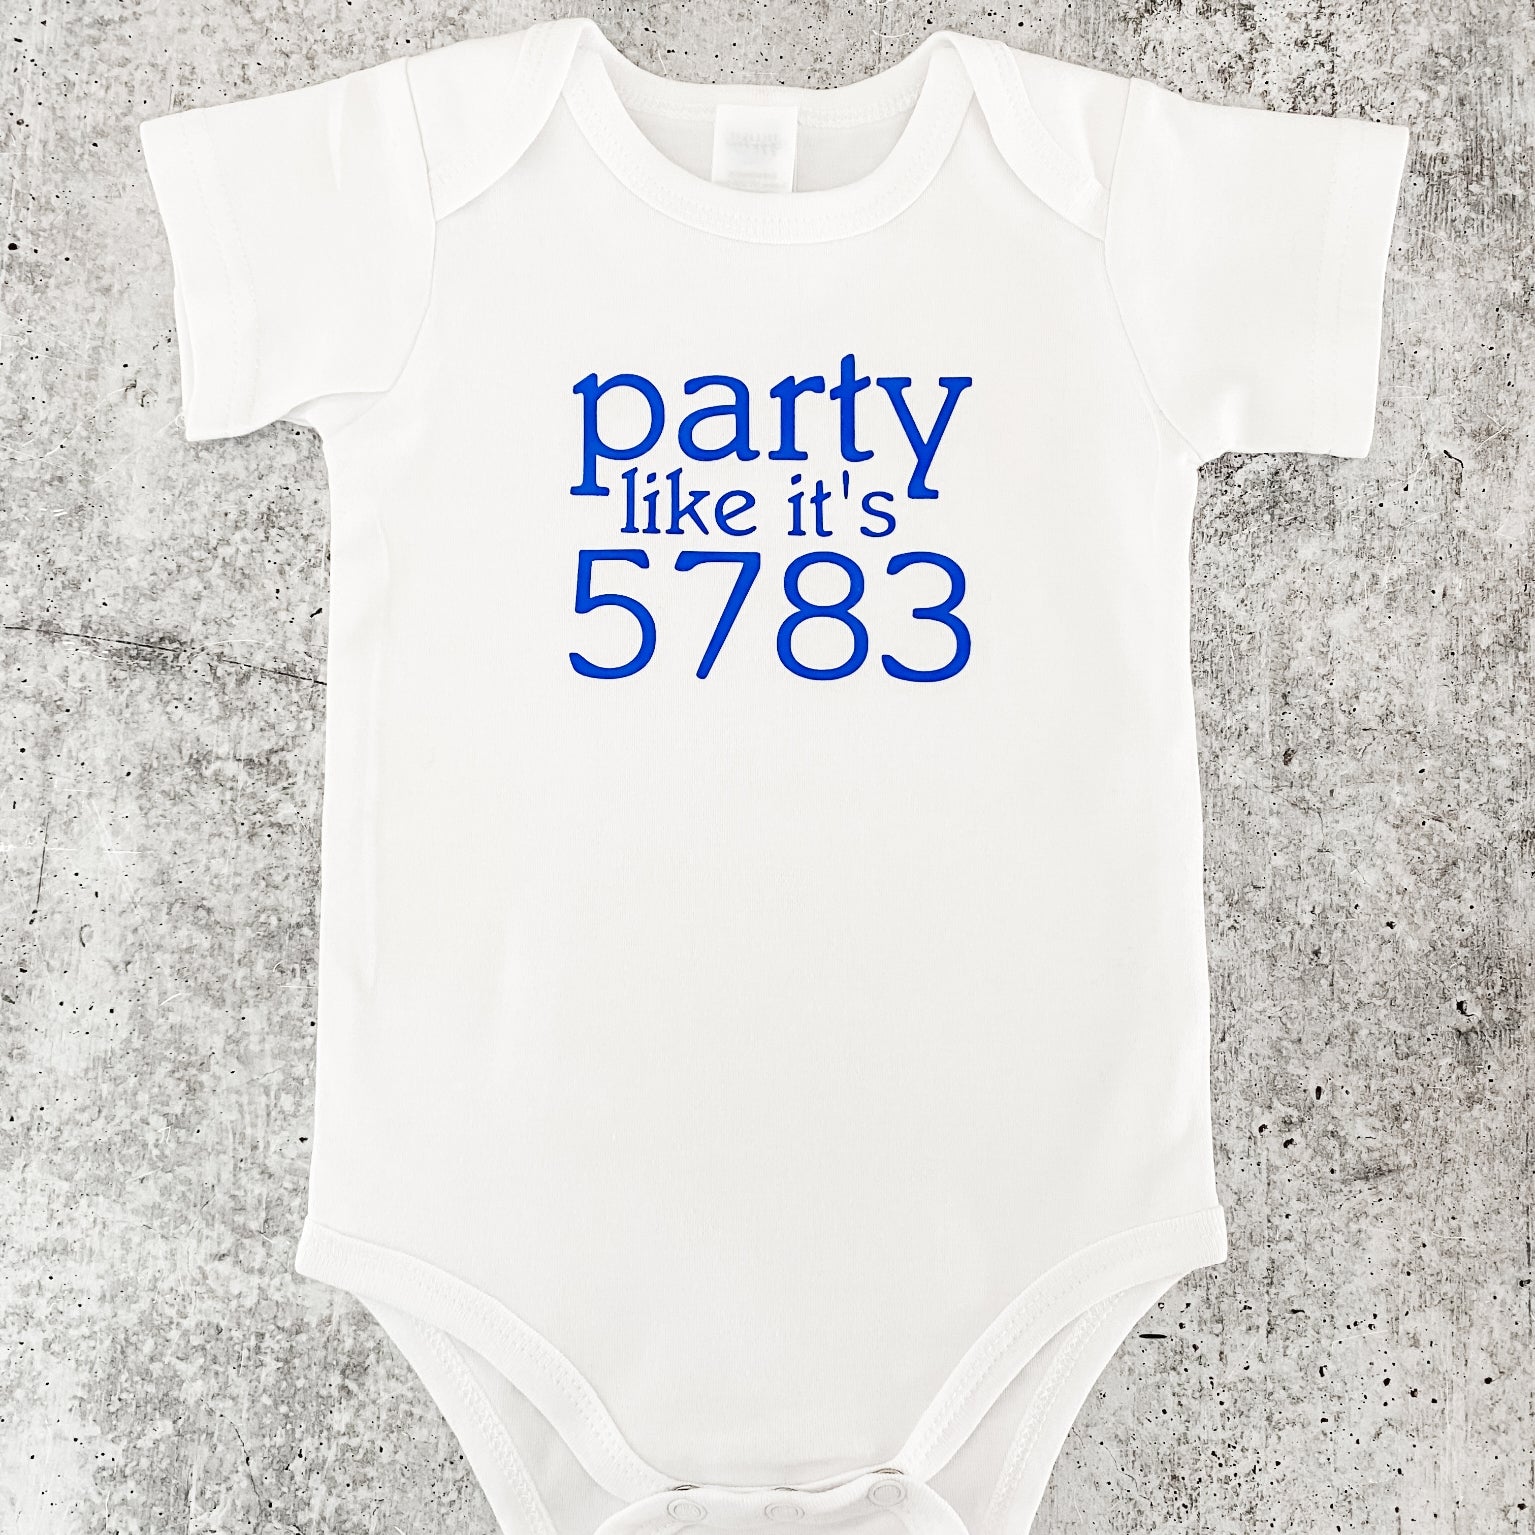 PARTY LIKE IT'S 5783 Baby Outfit and Toddler Tee Salt and Sparkle